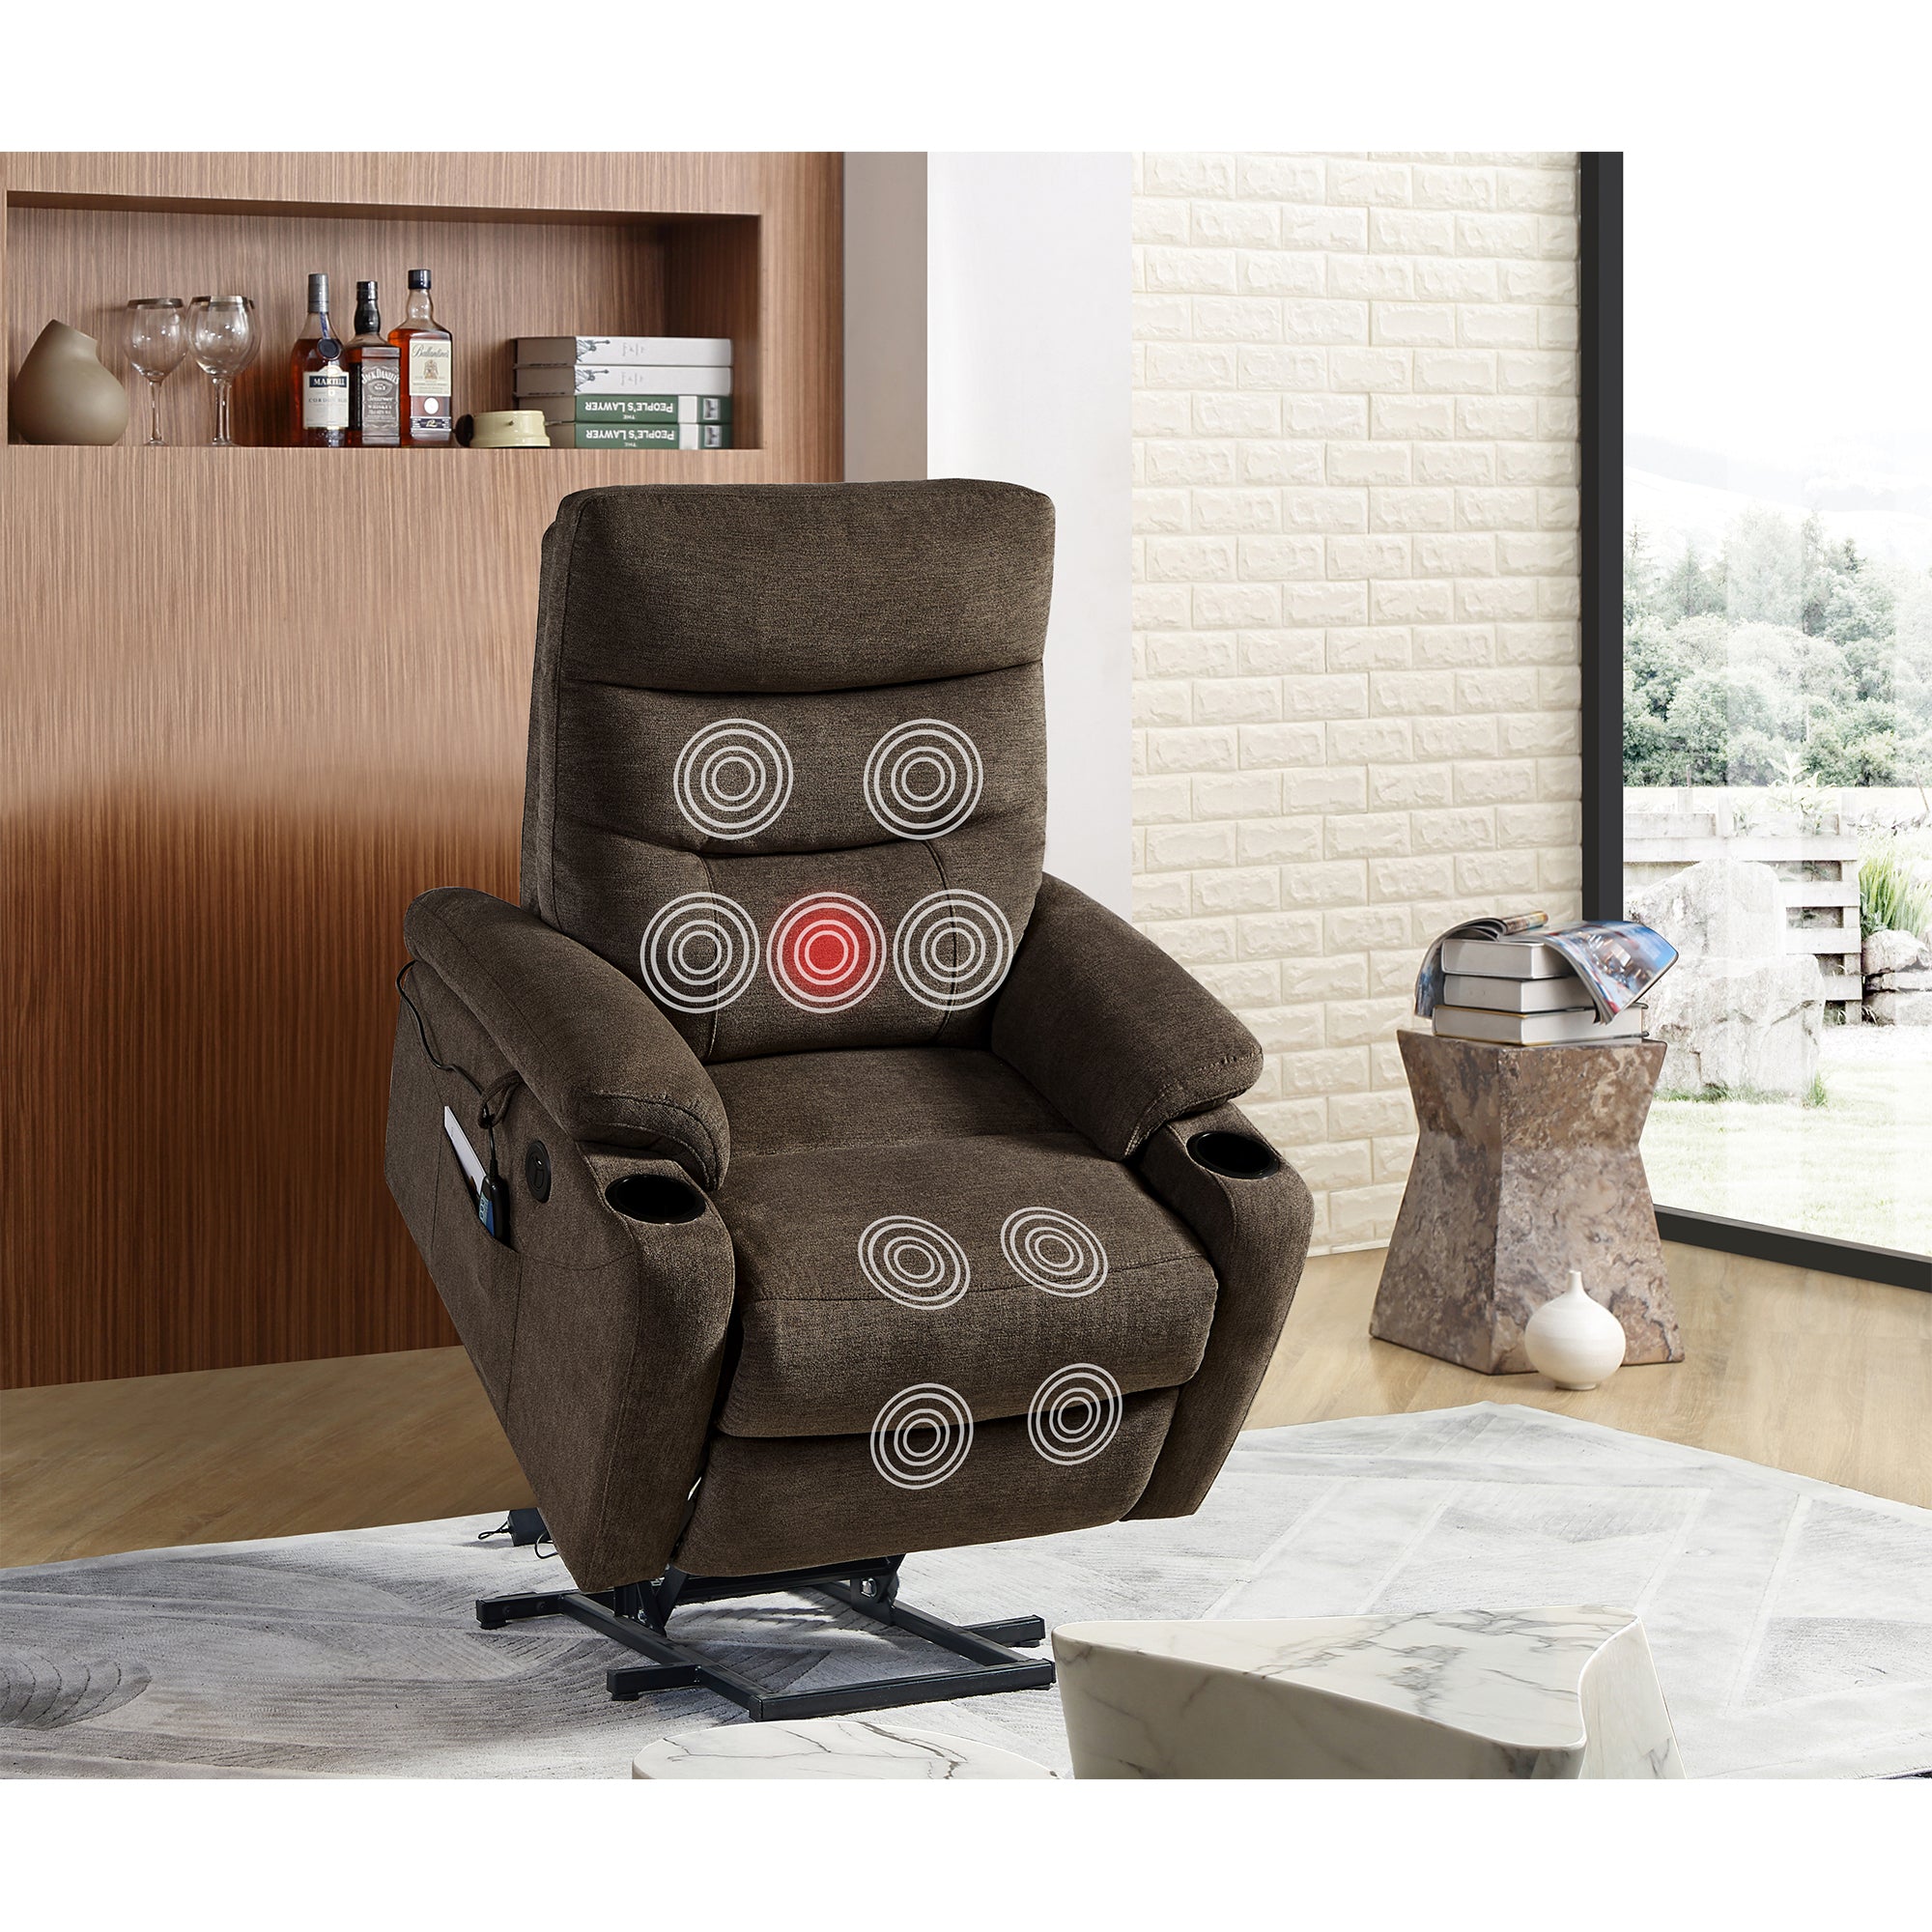 Dark Brown Power Lift Chair Front Profile with Lift Extended